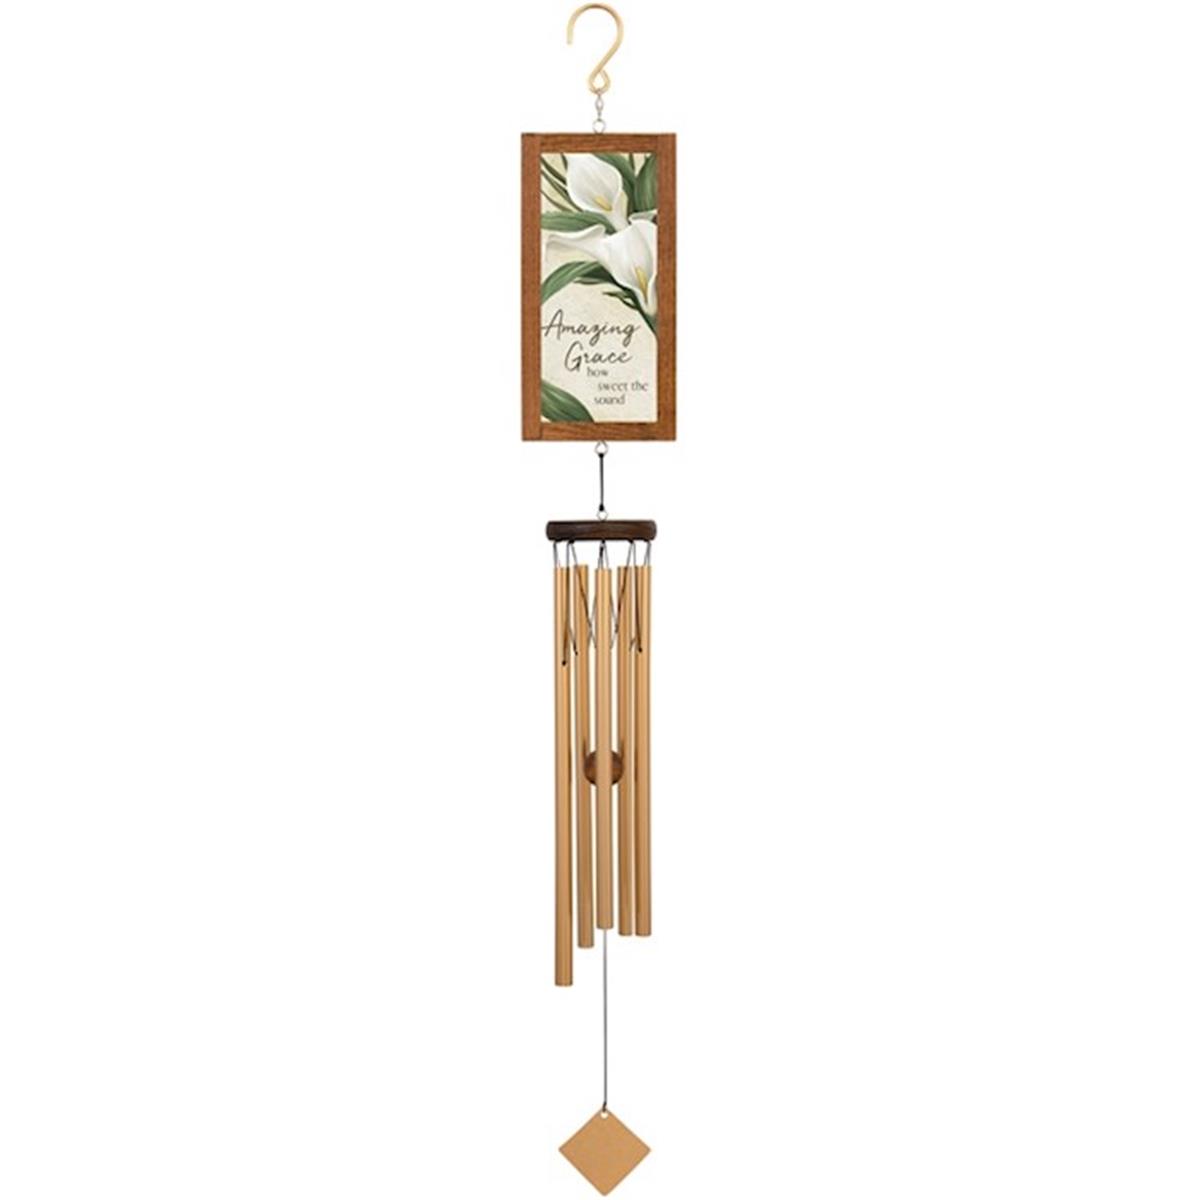 Picture of Carson Home Accents 272691 36 in. Wind Chime - Framed Sentiment - Amazing Grace